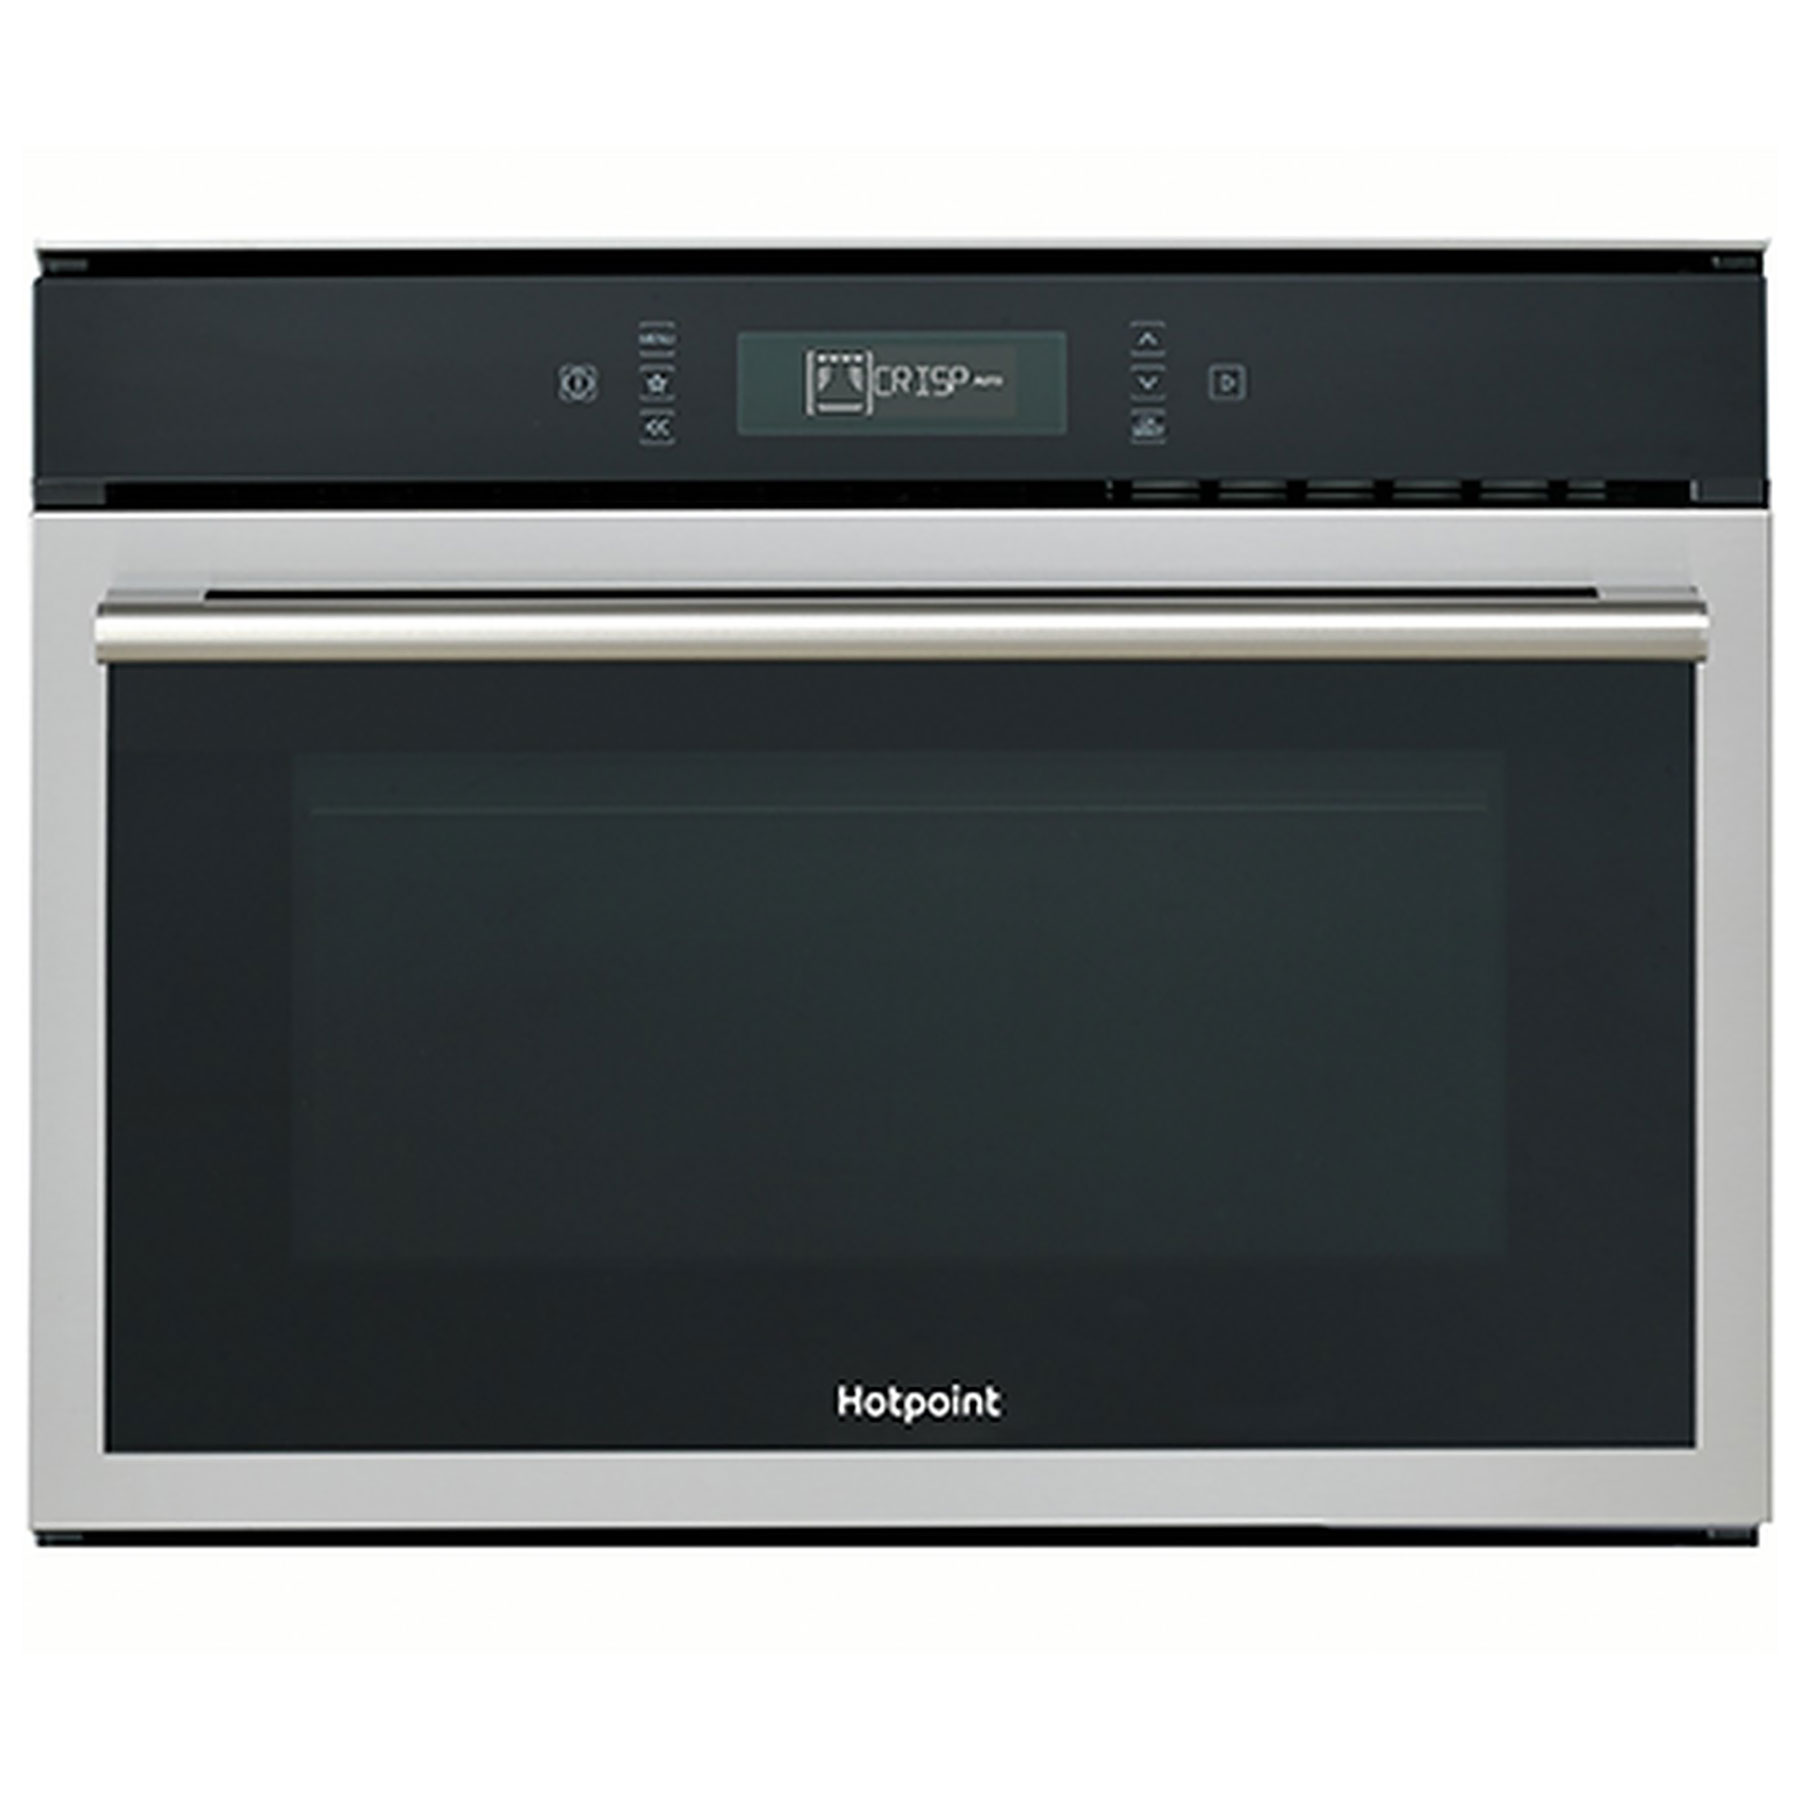 Hotpoint MP676IXH Built In 45cm Microwave Oven with Grill St Steel